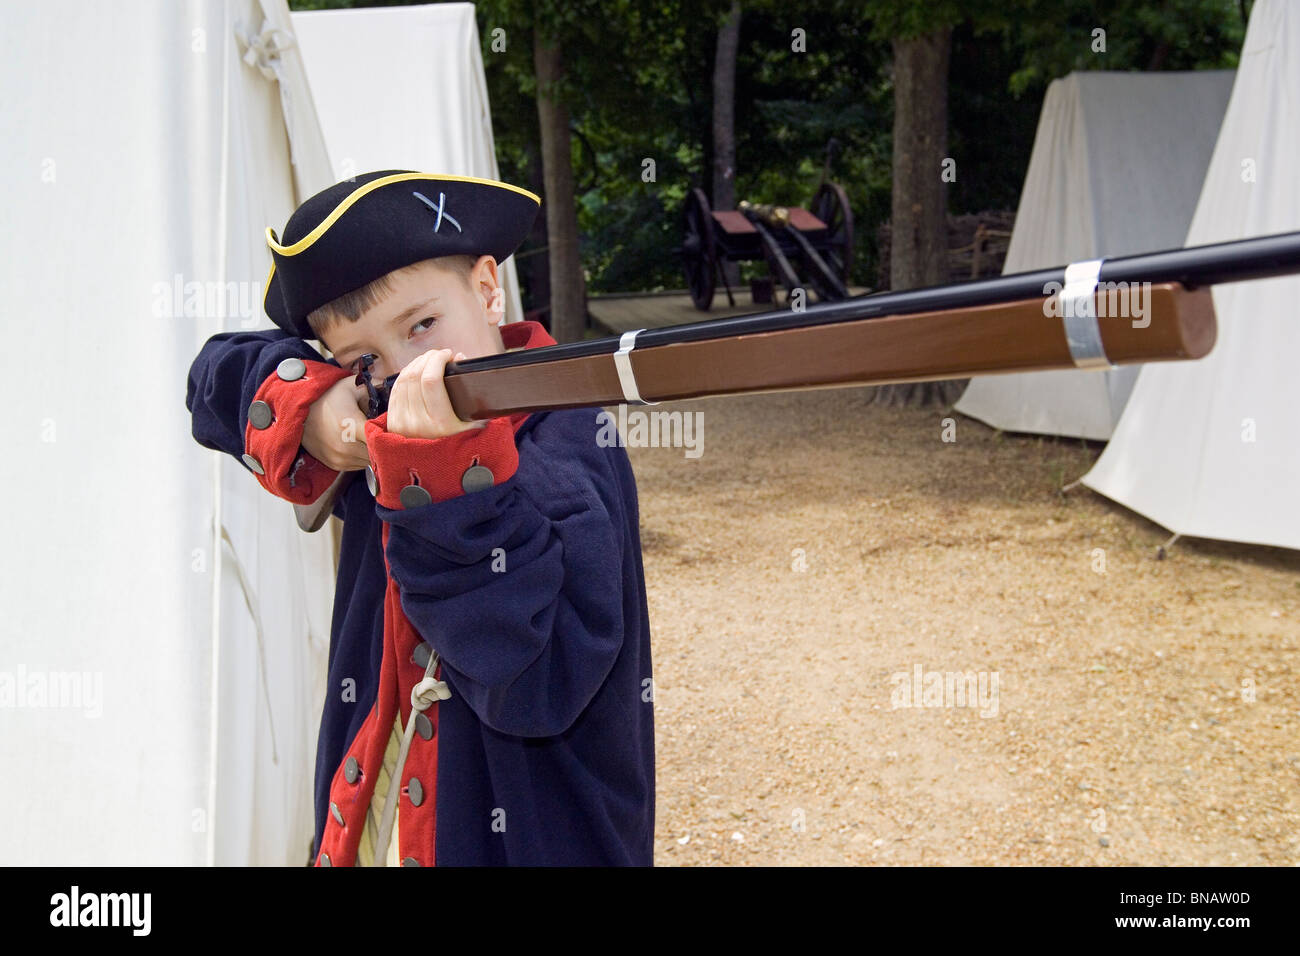 A young visitor with a toy gun dresses up as a Continental Army soldier at Yorktown Victory Center, a living history museum in Yorktown, Virginia, USA. Stock Photo